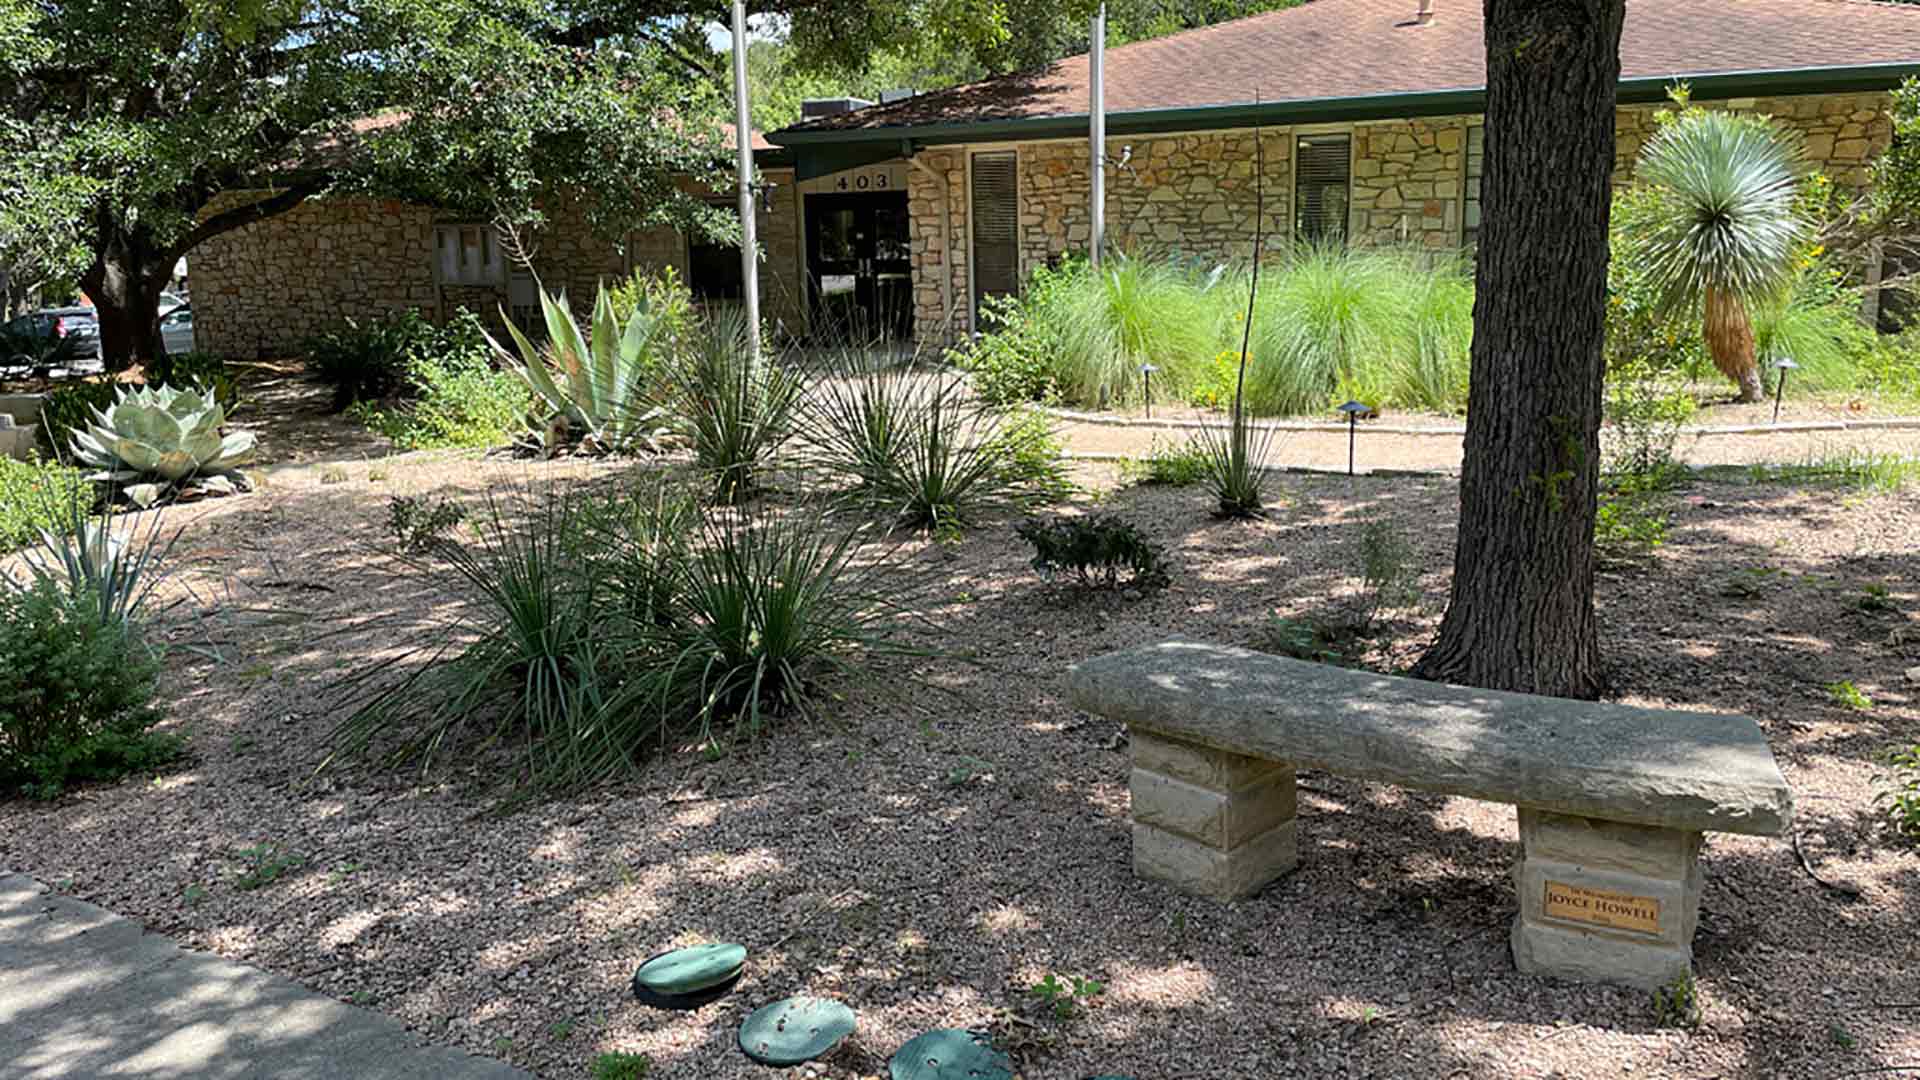 Property in Rollingwood, Texas with xeriscaping and bench.